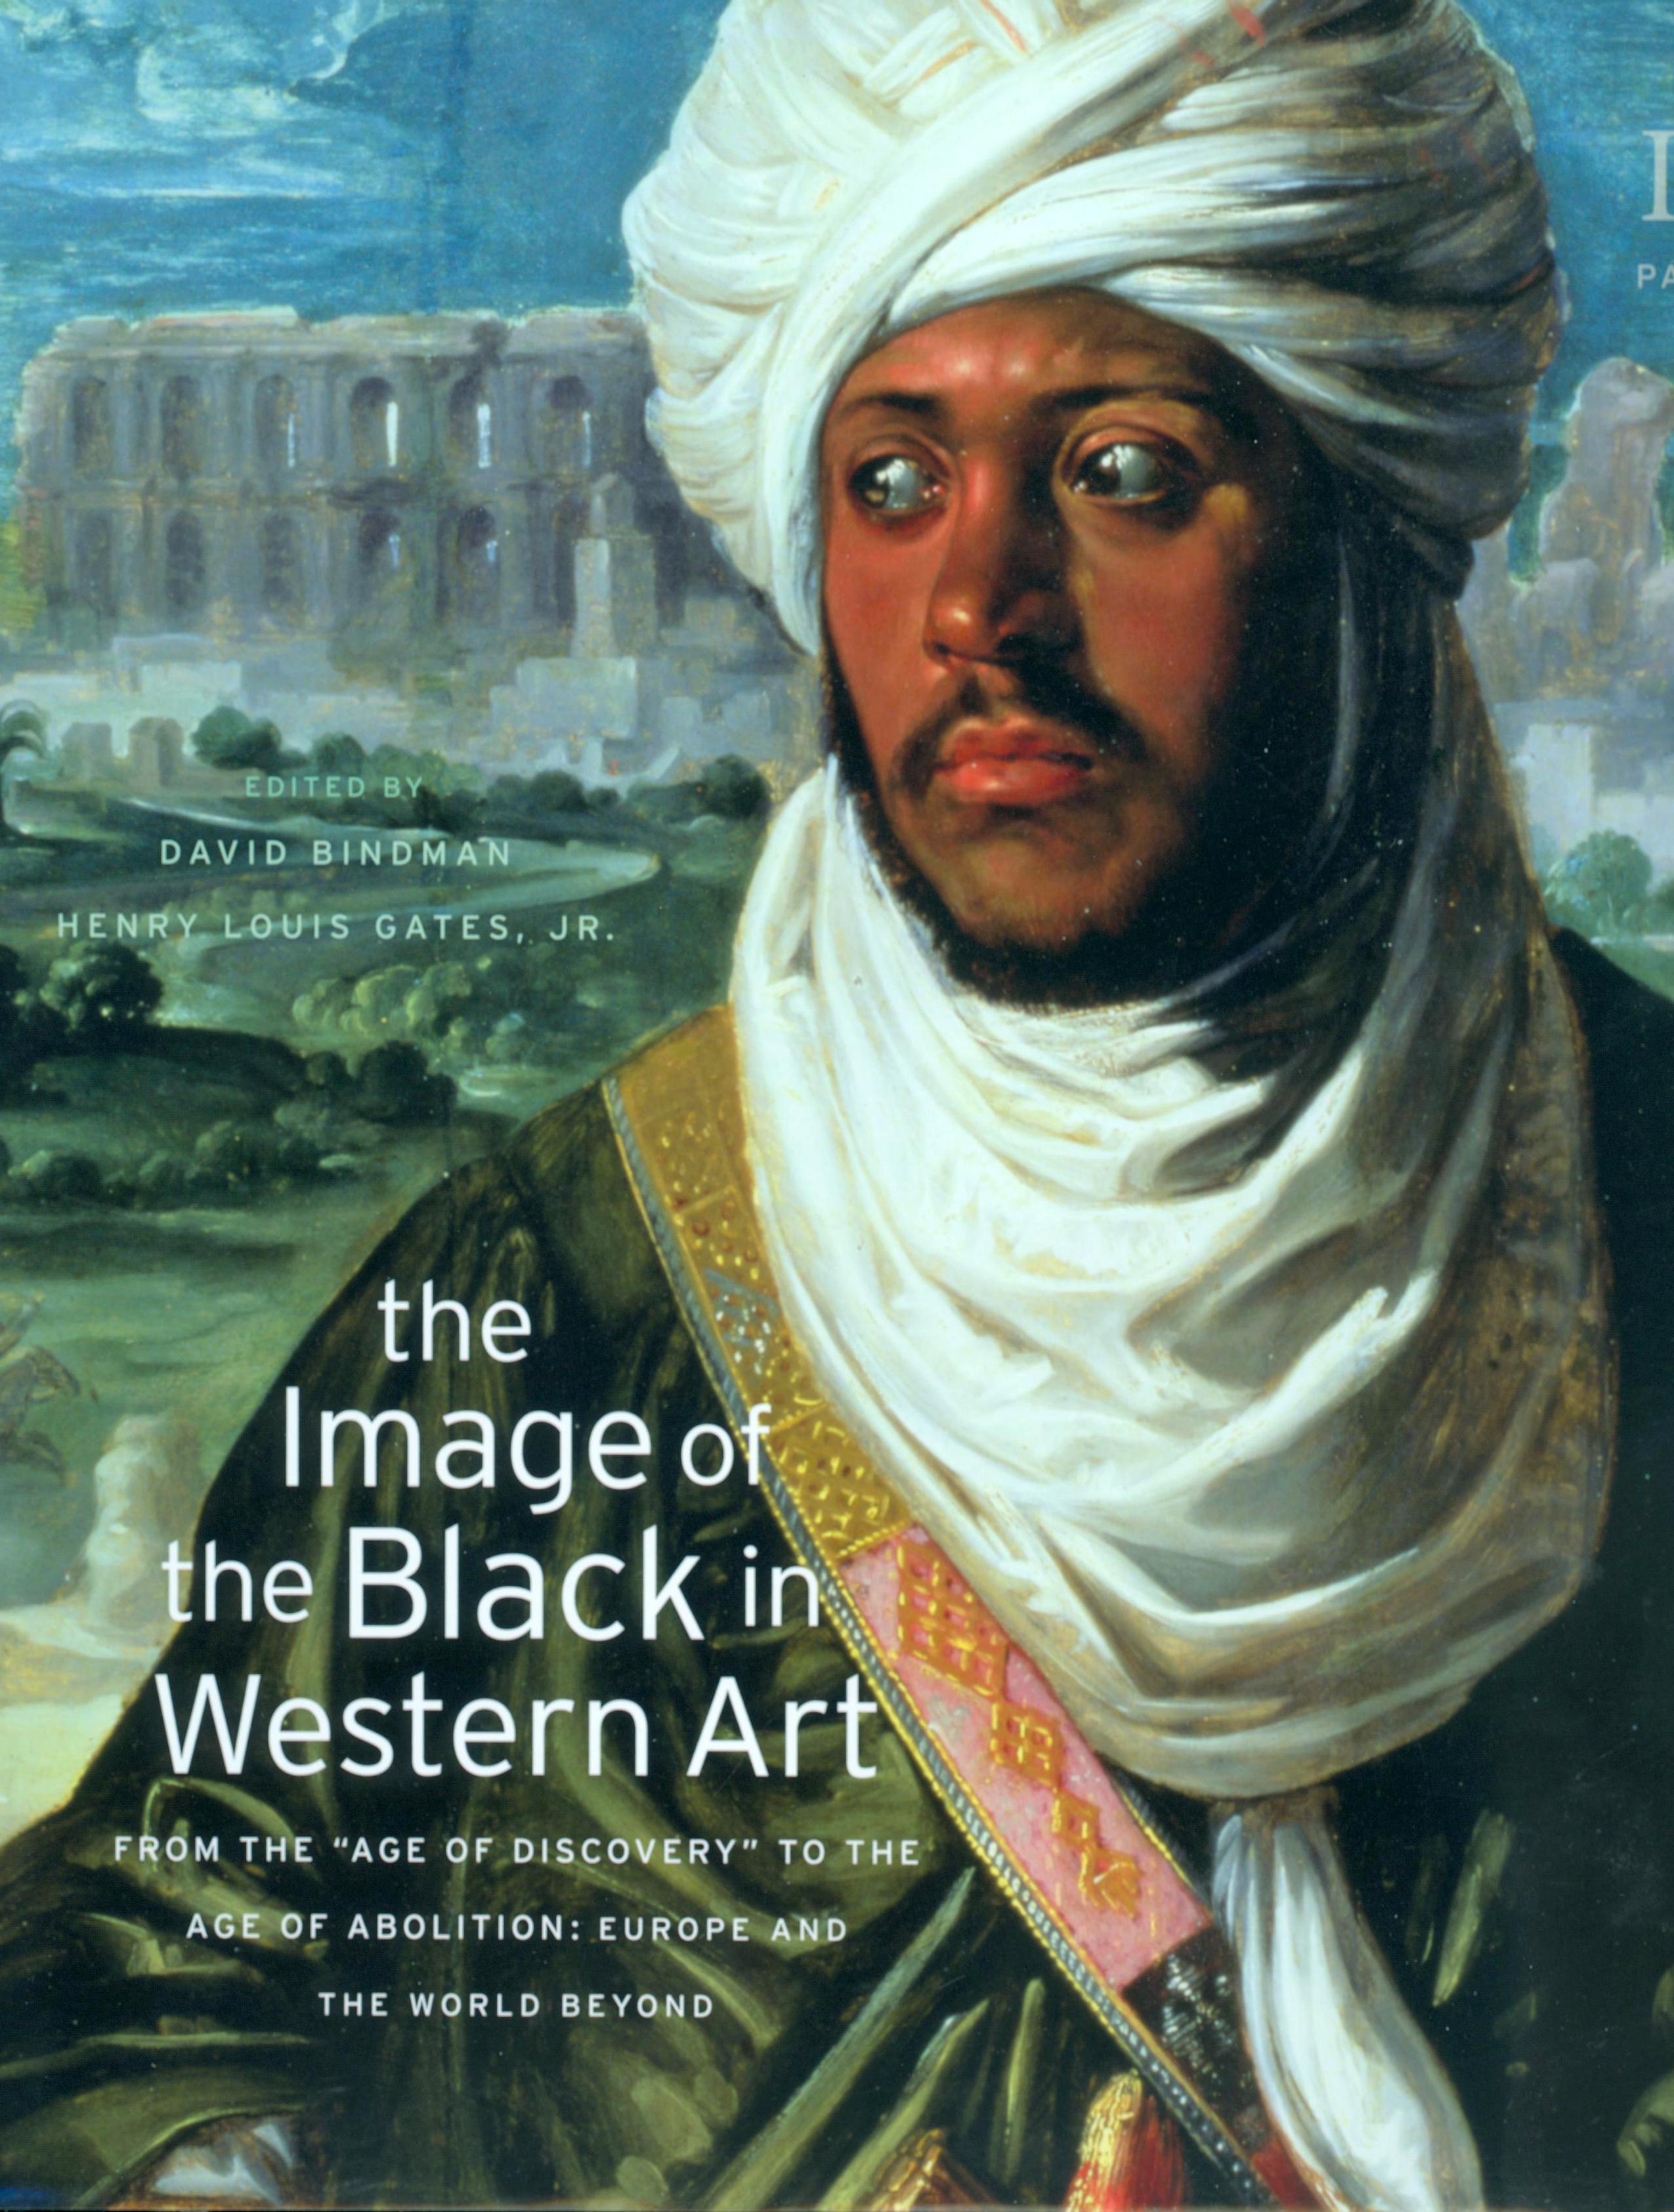 Professor Jean Michel Massing has published his volume in Harvard University Press’s series ‘The Image of the Black in Western Art’, edited by David Bindman and Henry Louis Gates Jr.